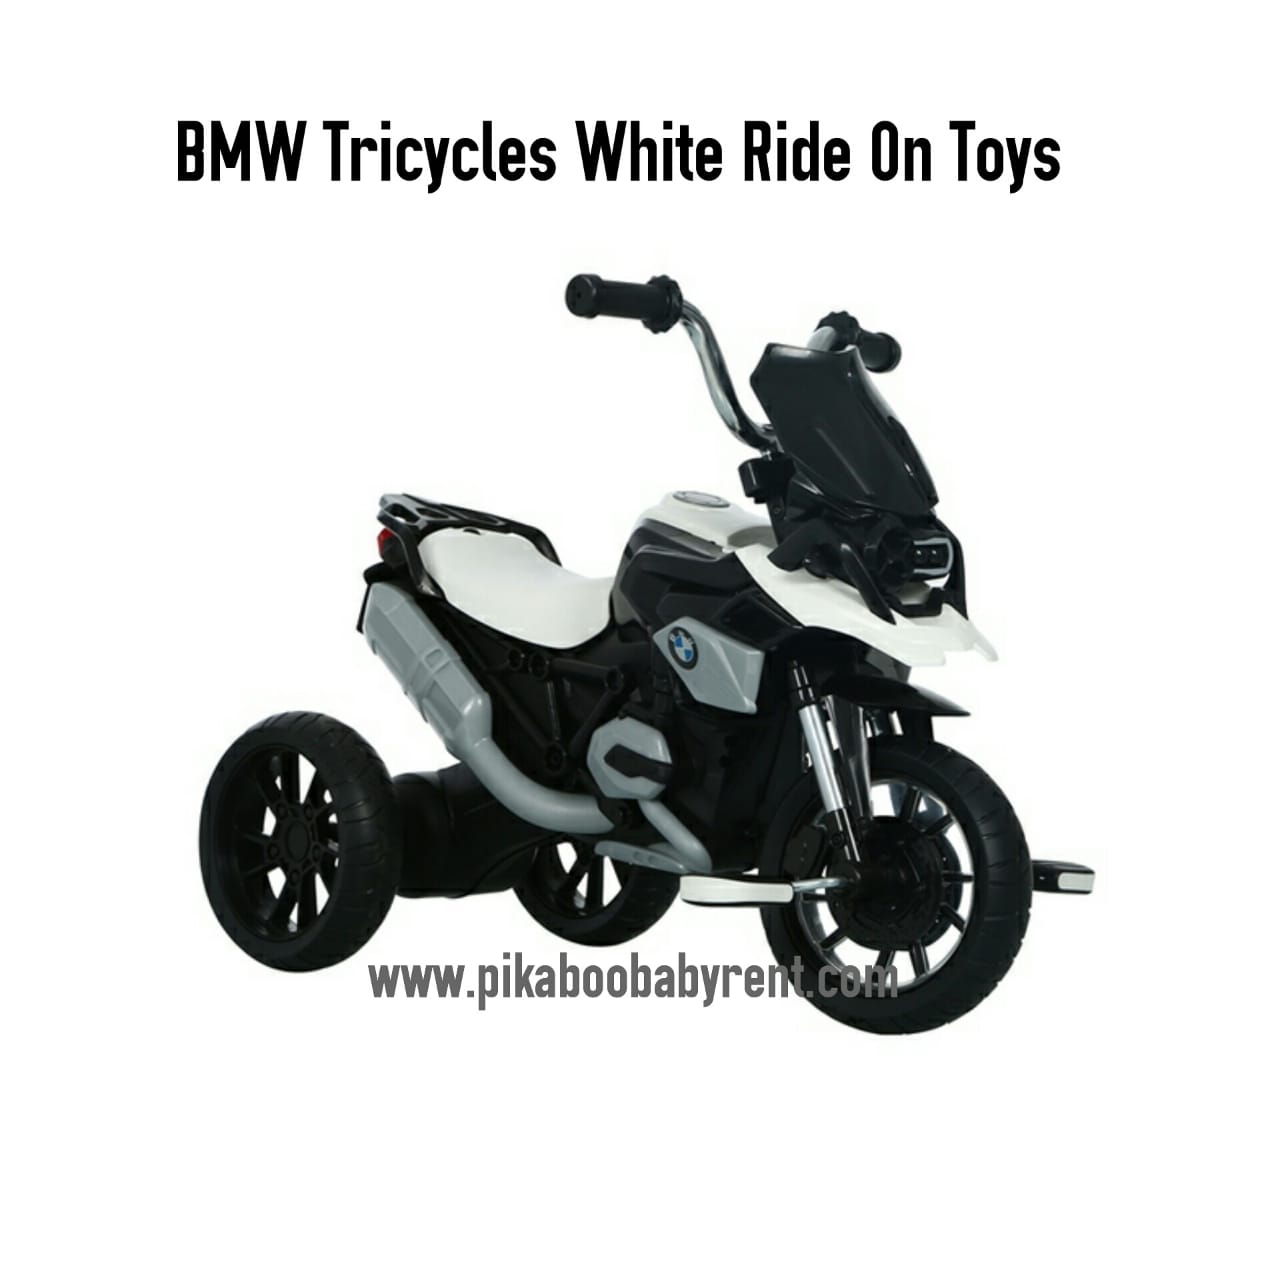 BMW TRICYCLES WHITE RIDE ON TOYS